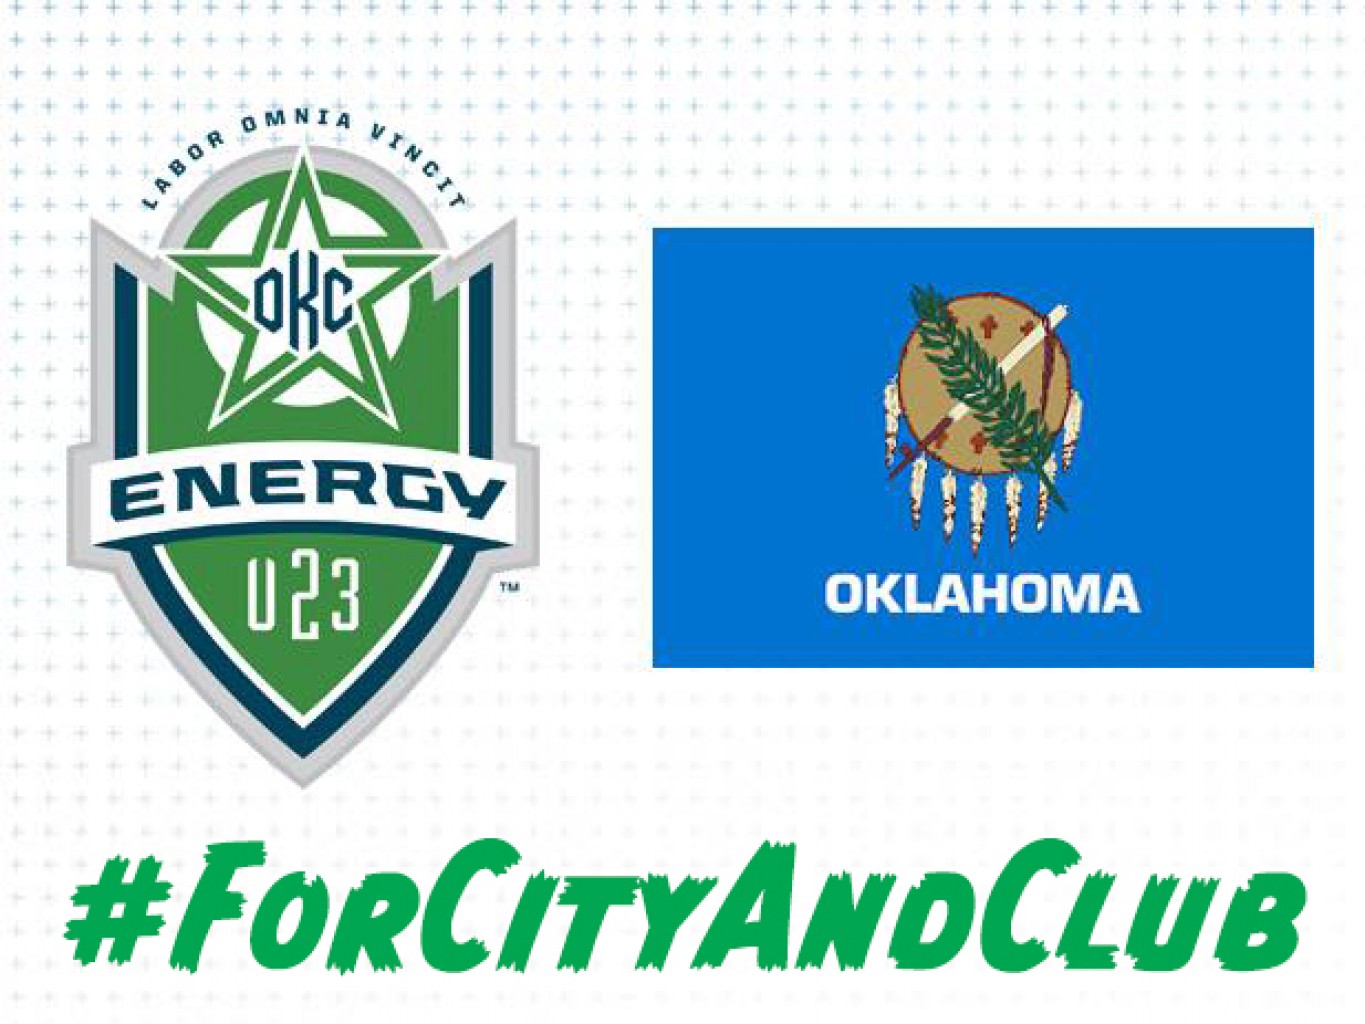 U23 ADD 11 OKLAHOMANS TO THE 2018 ROSTER